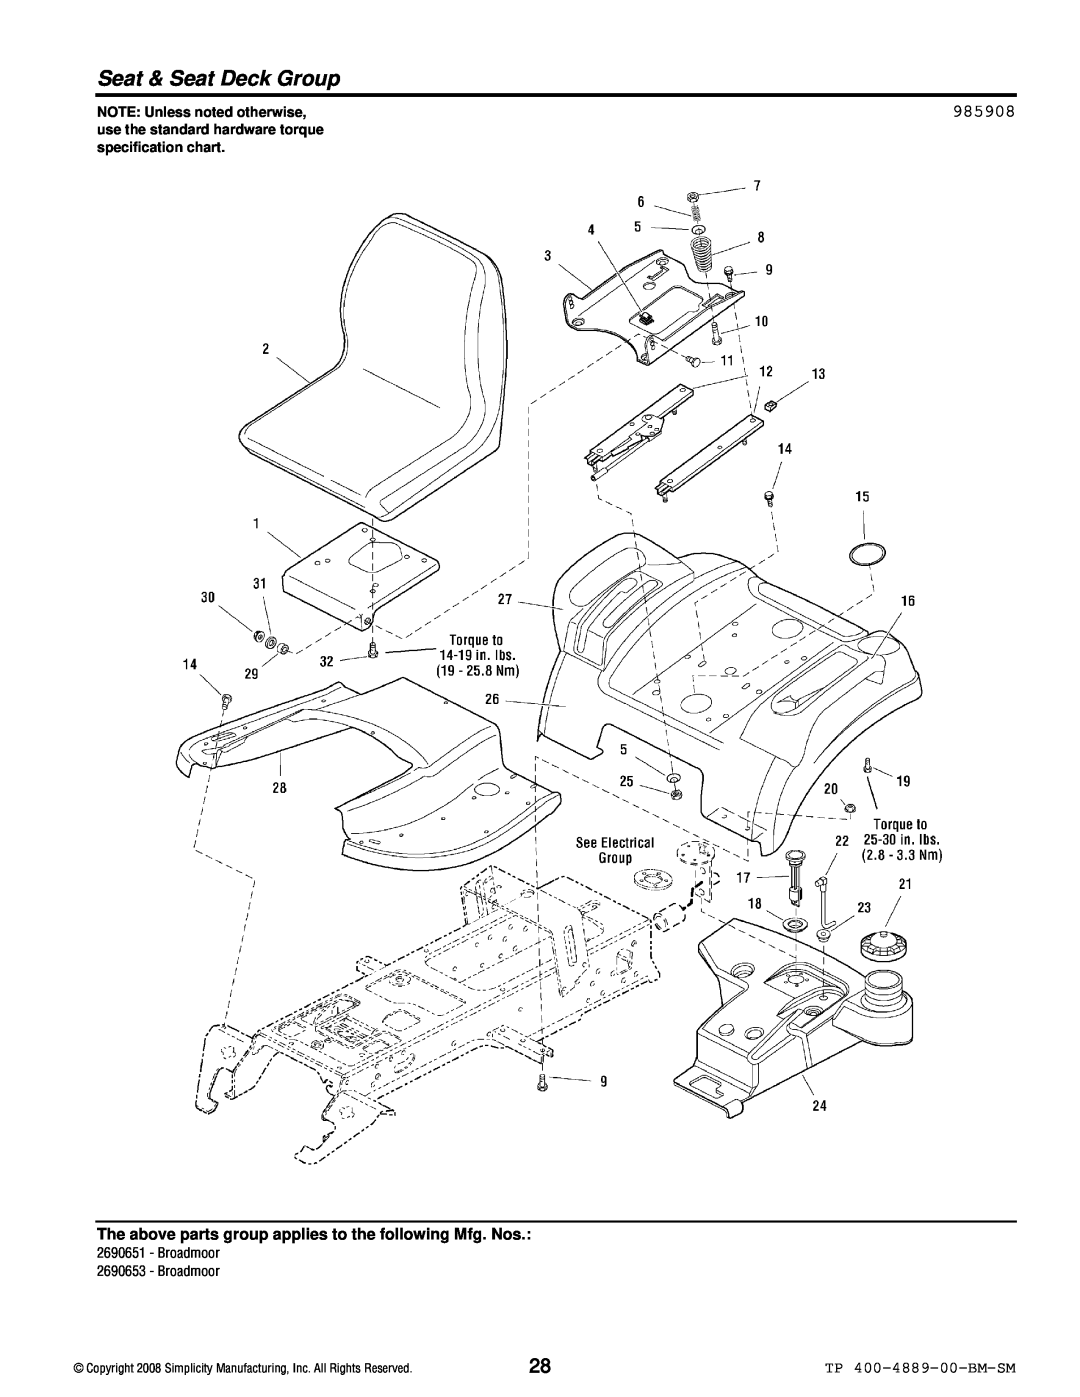 Simplicity 2600 Series manual Seat & Seat Deck Group, 985908, TP 400-4889-00-BM-SM, NOTE: Unless noted otherwise 